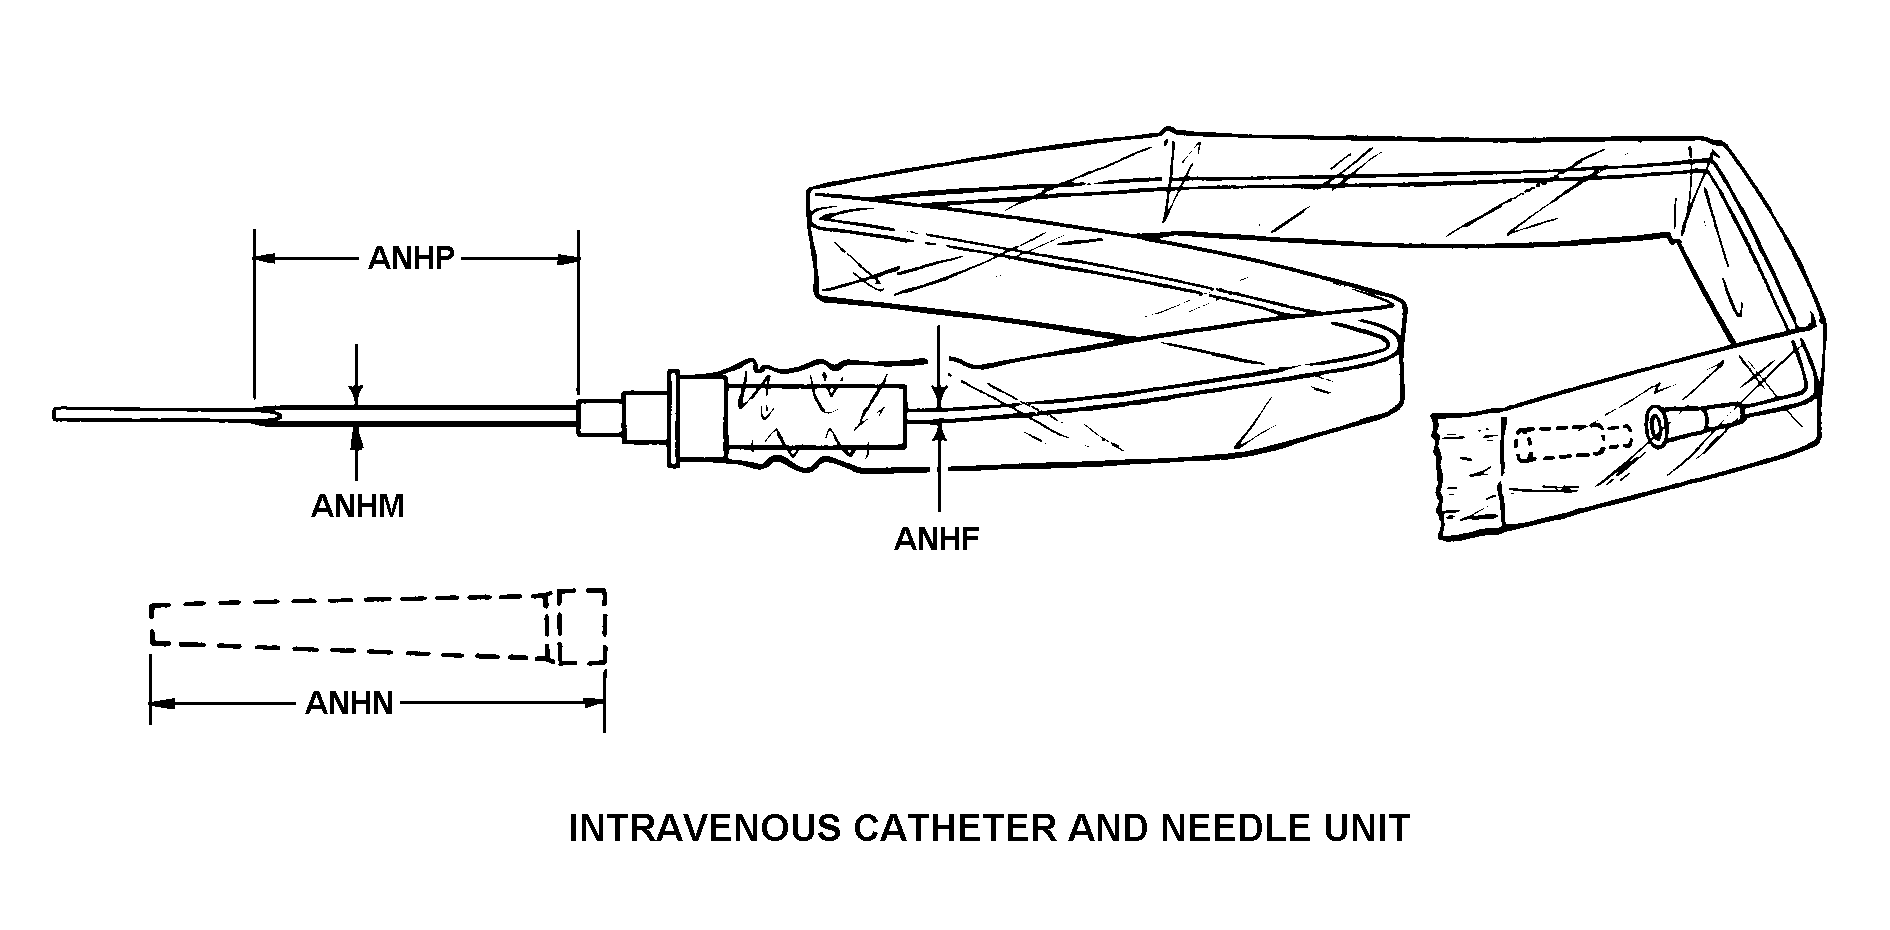 INTRAVENOUS CATHETER AND NEEDLE UNIT style nsn 6515-01-186-6022